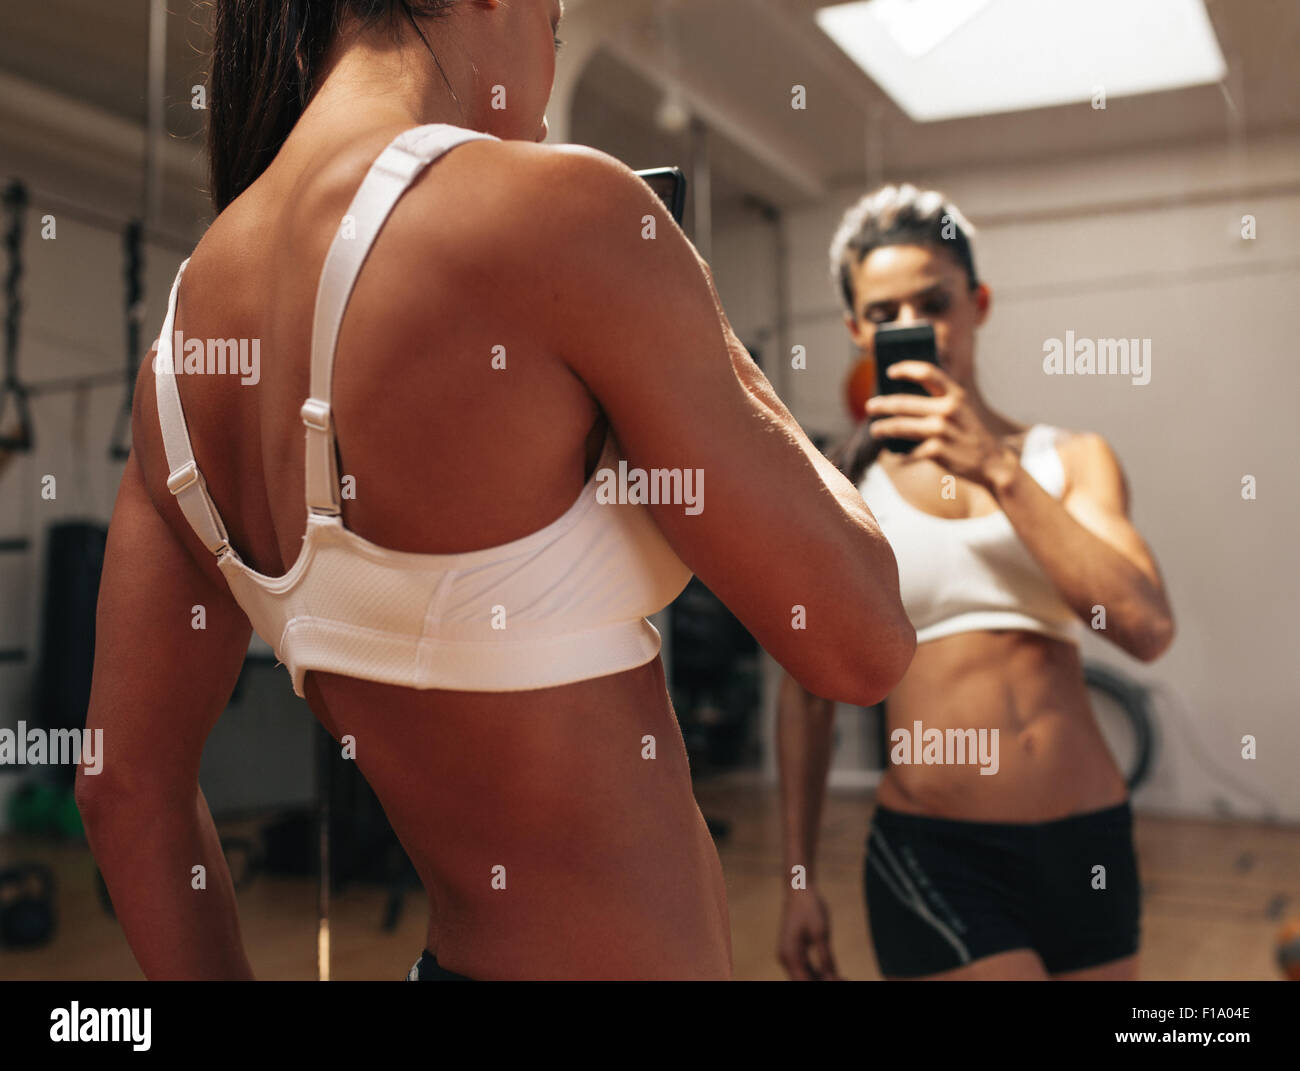 Sporty young woman taking a picture of herself in a mirror. Fitness model taking a selfie in front of a mirror in gym. Stock Photo